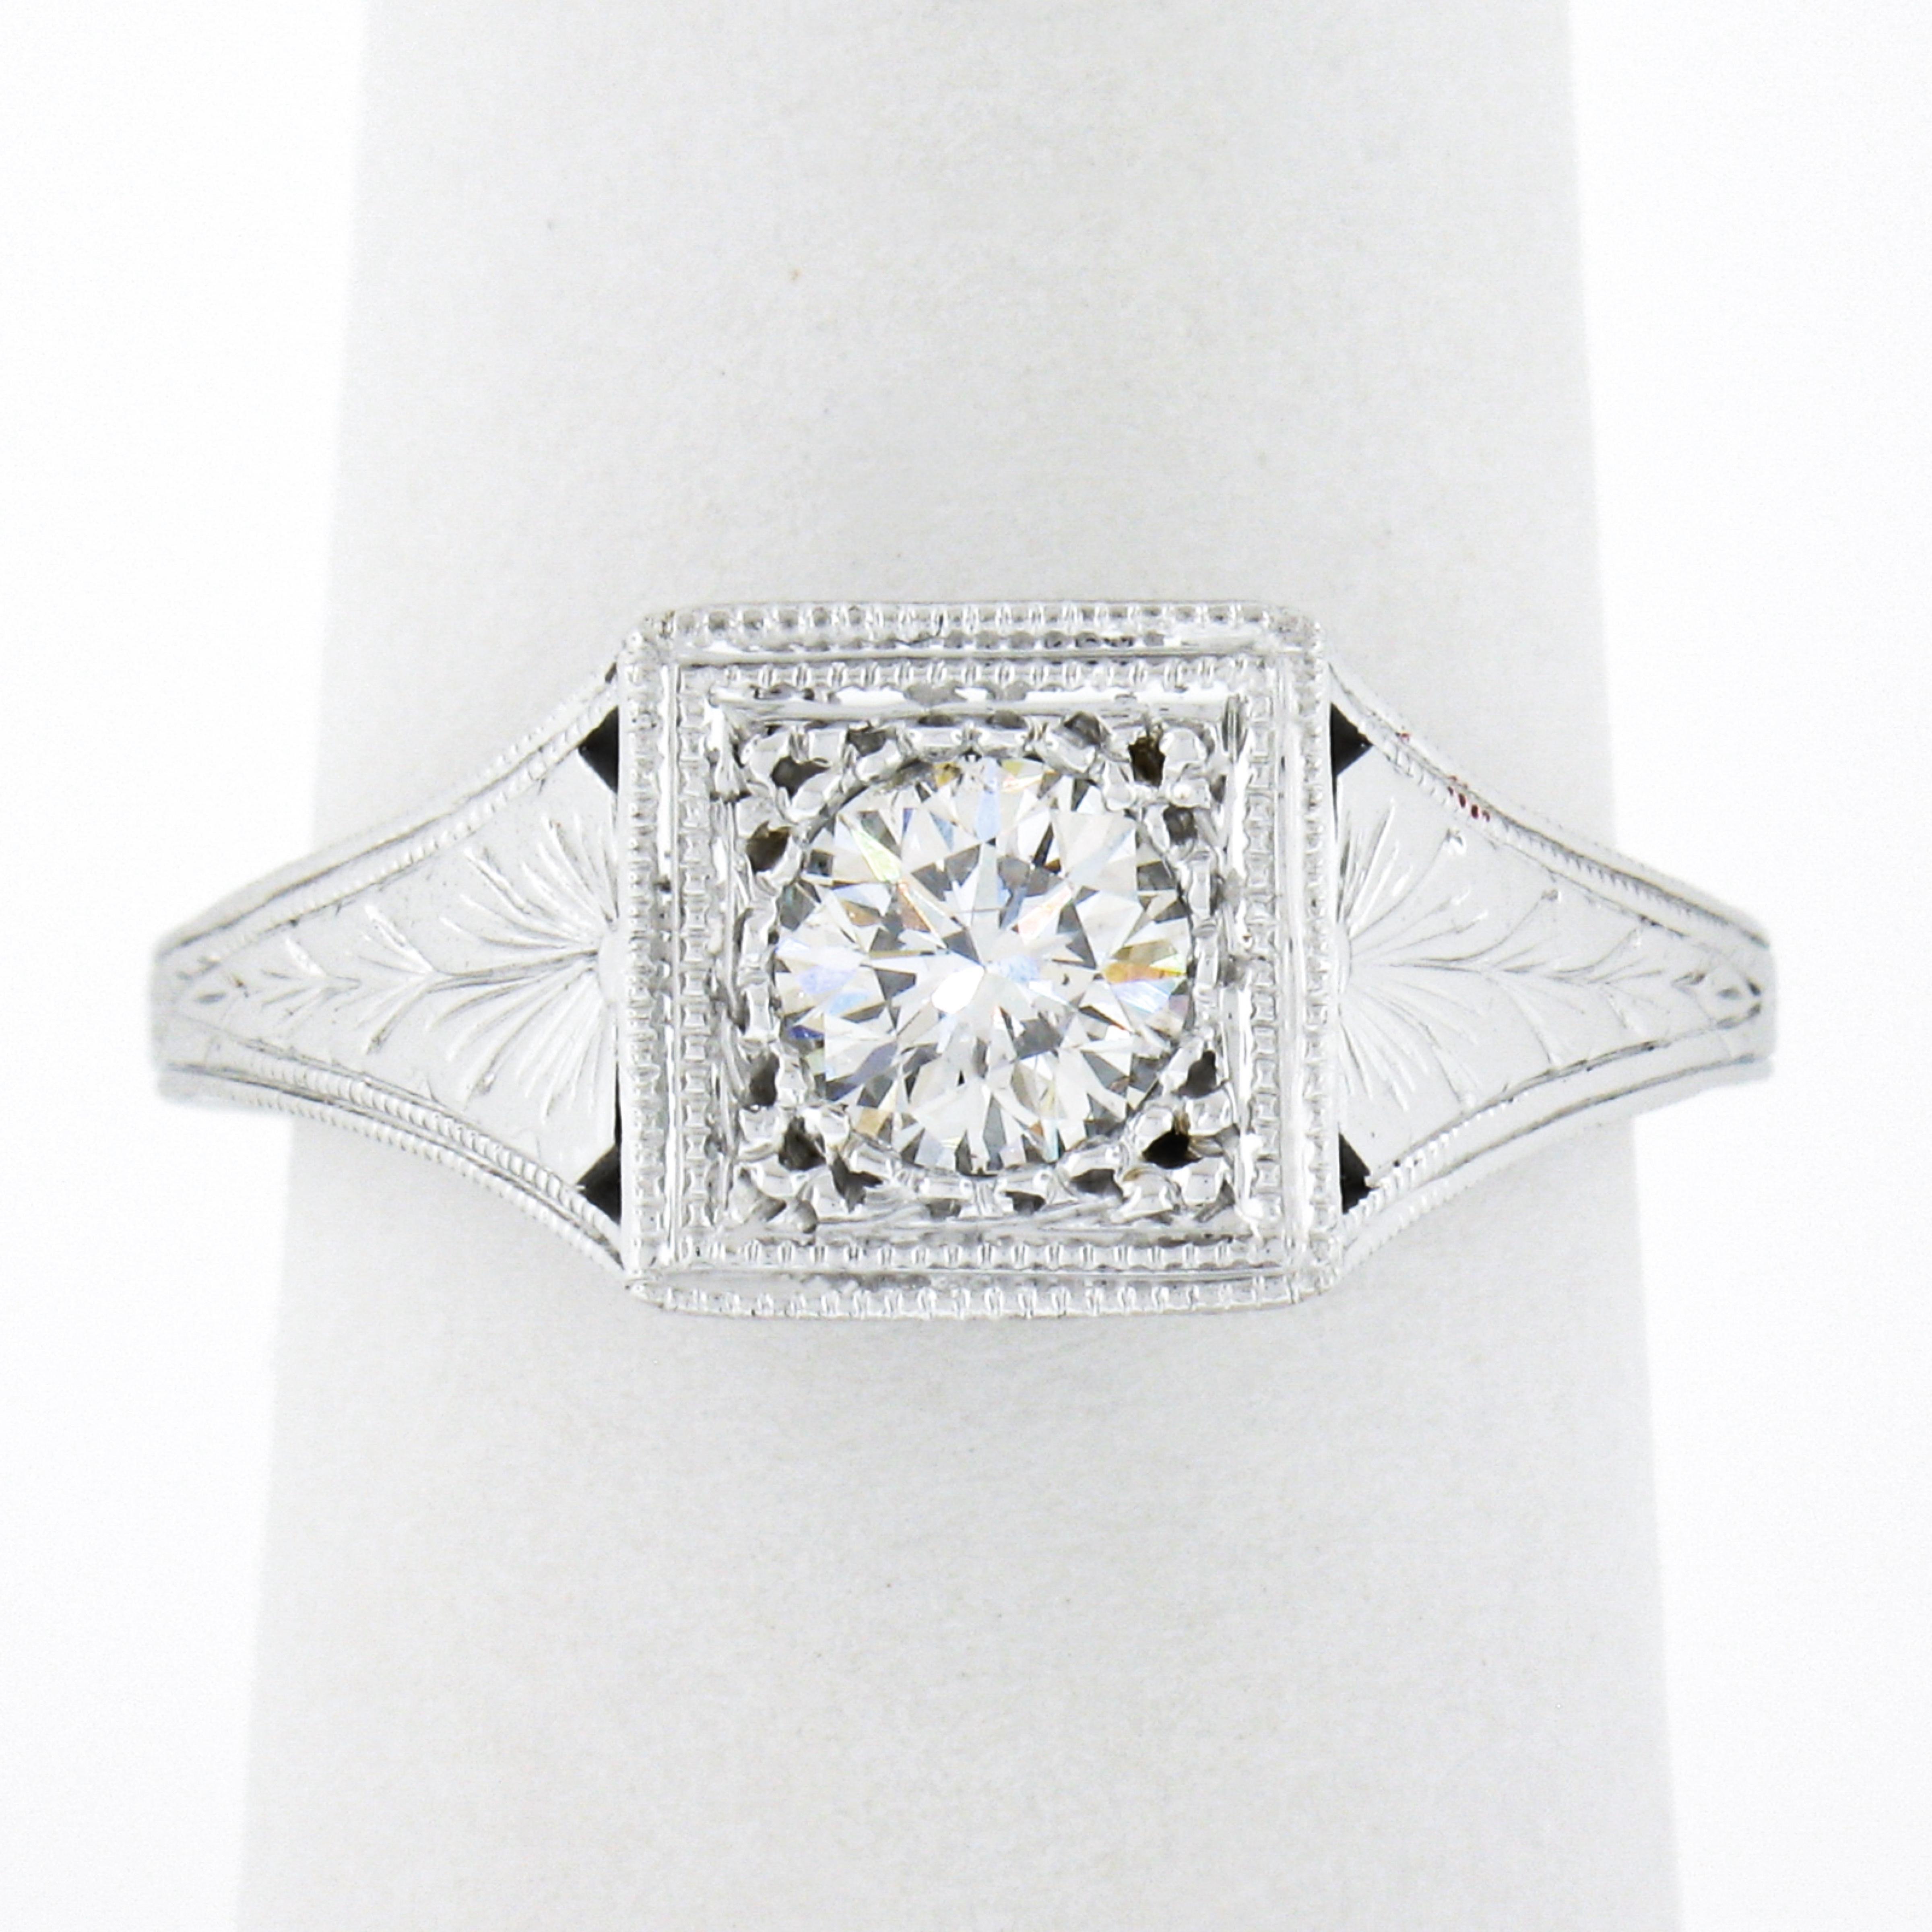 Here we have an incredible, brand new ring crafted from solid 14k white gold. The ring features a GIA certified round brilliant cut diamond neatly pave set at the center of the milgrain etched squared top. The stunning solitaire weighs exactly 0.50